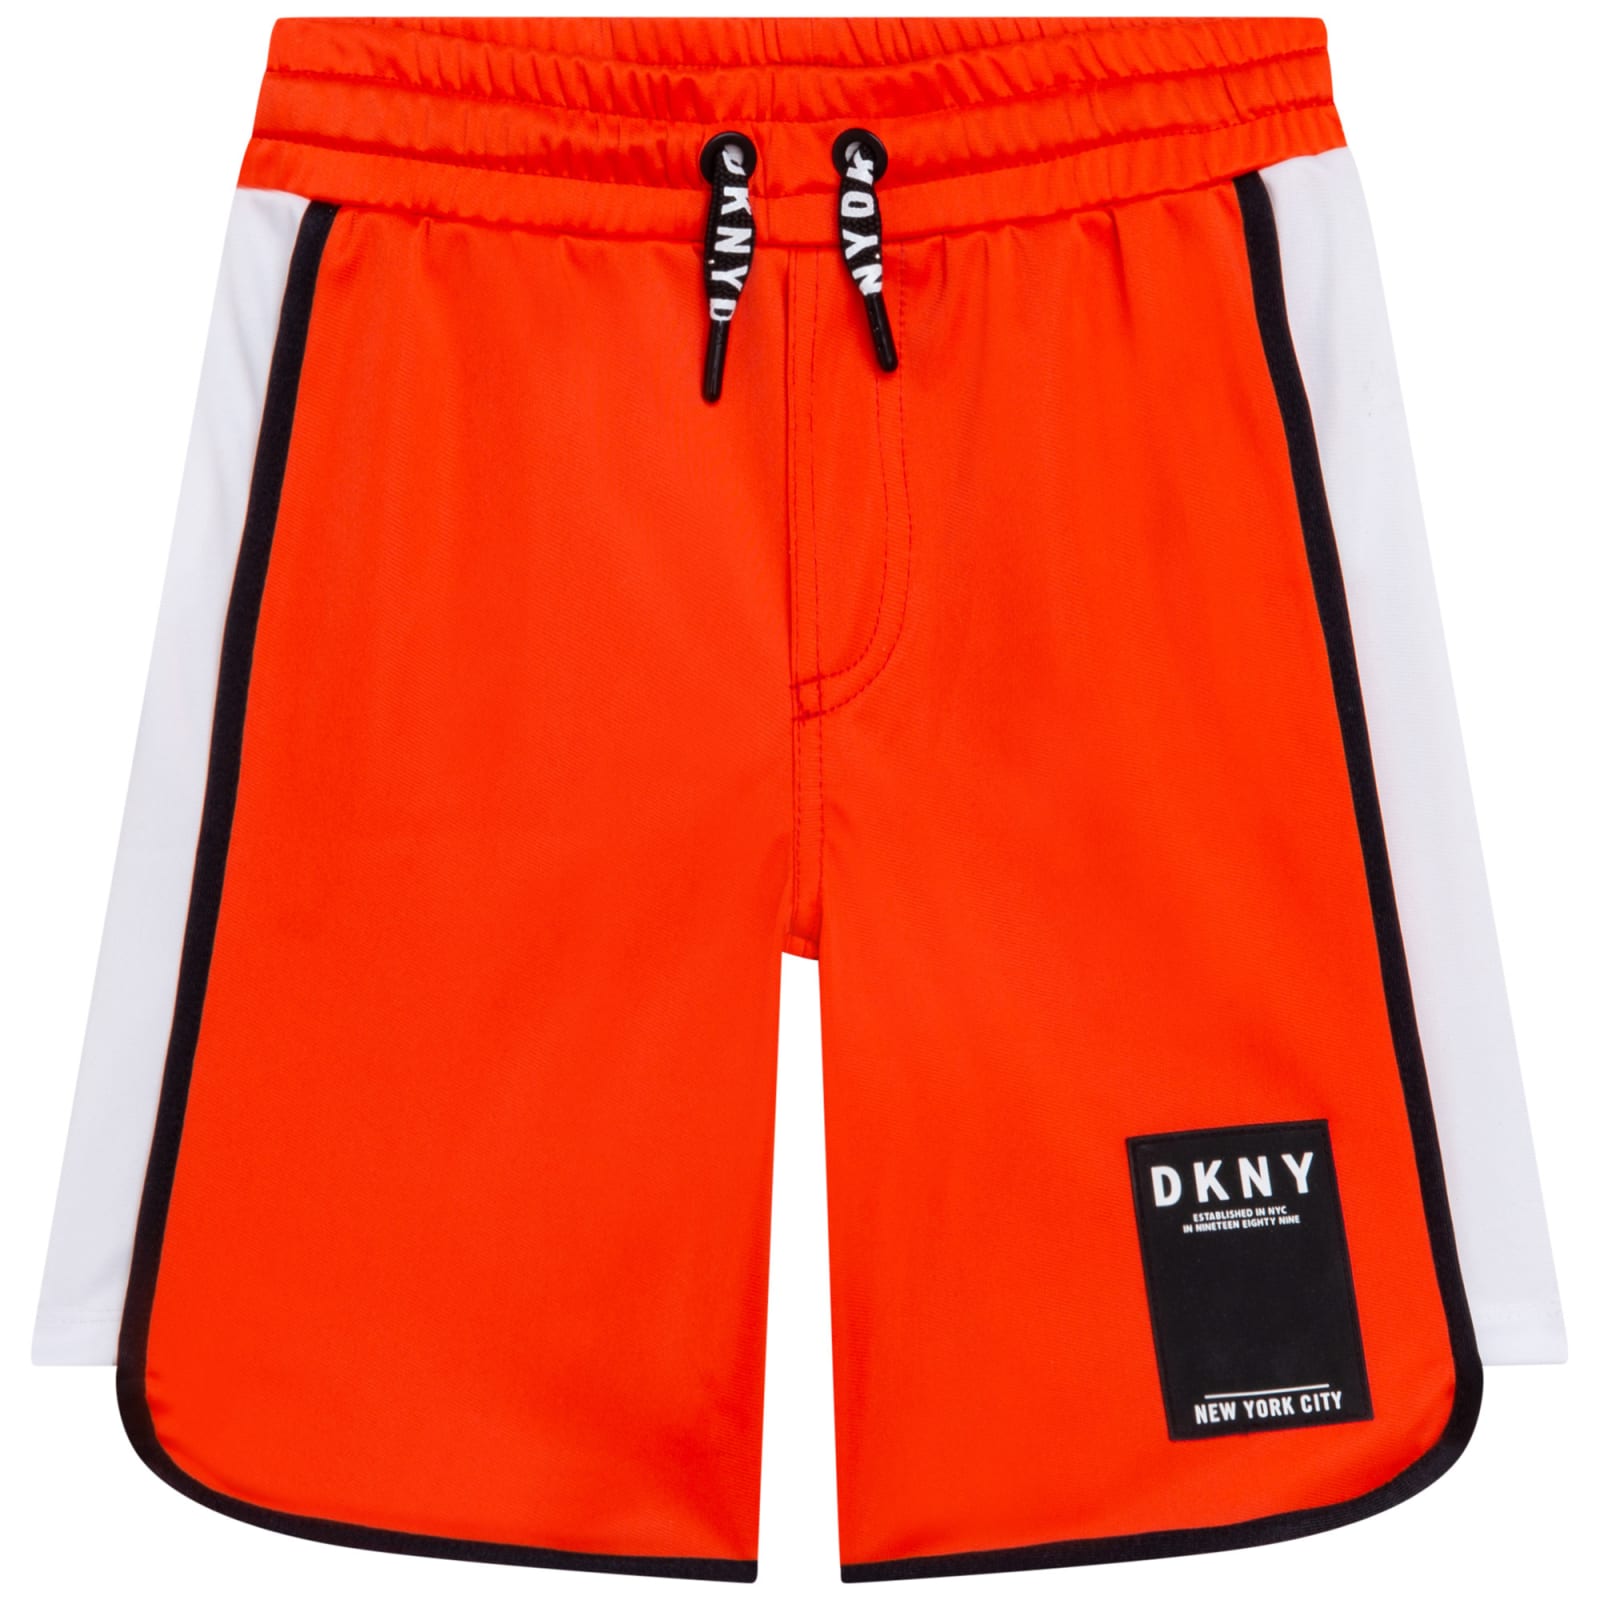 DKNY Sports Shorts With Application